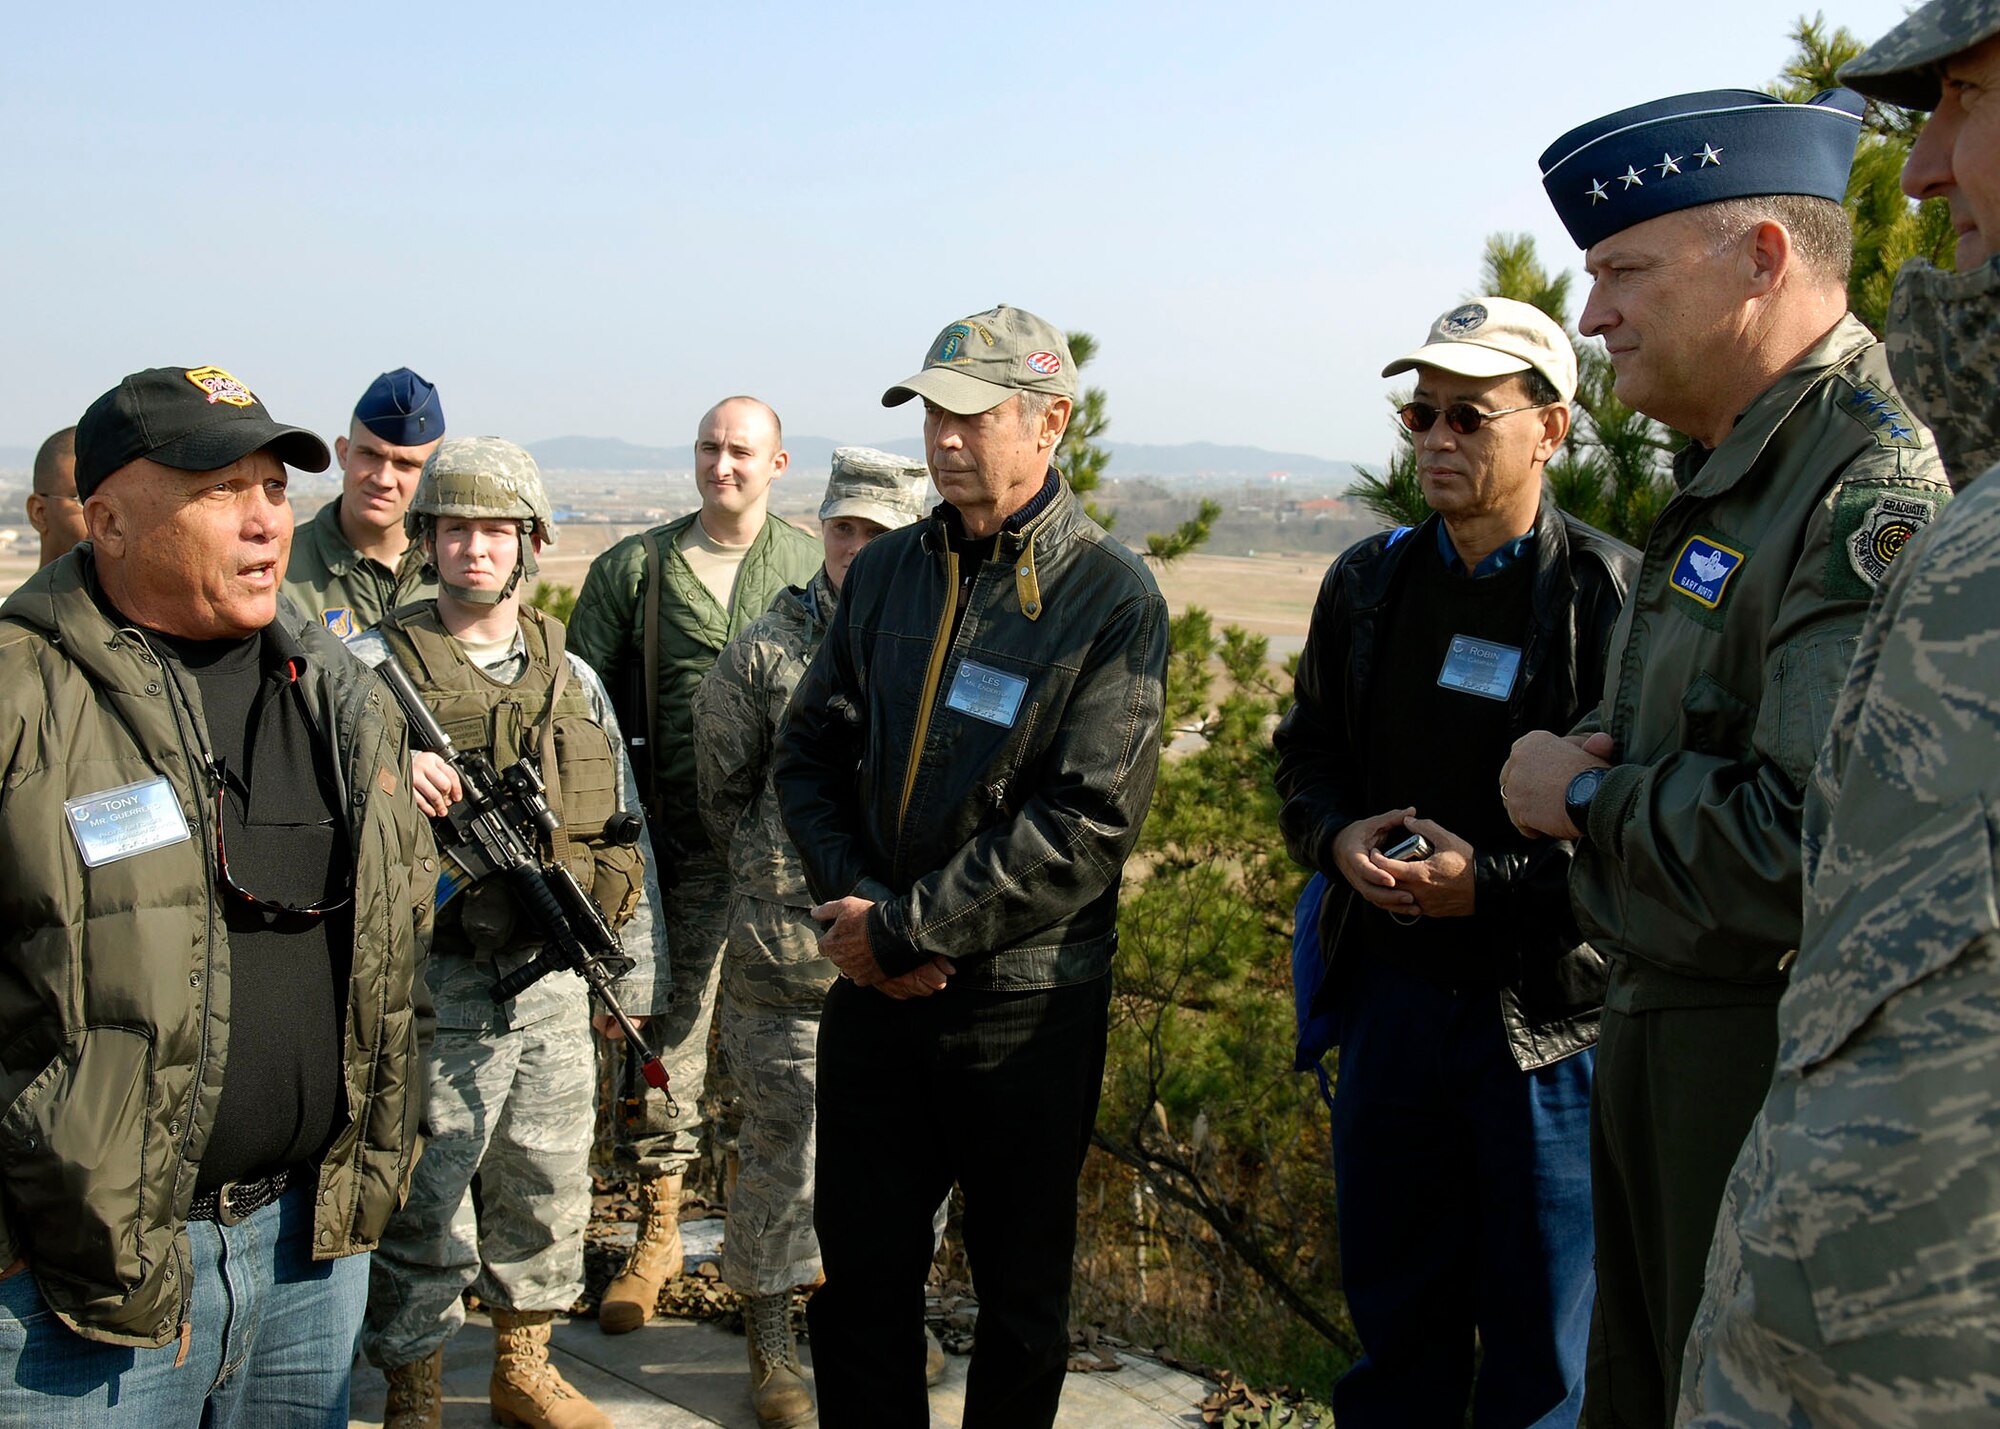 Anthony Guerrero, Jr., Executive Vice President for First Hawaiian Bank, expresses his appreciation and gratitude to Airmen from the 8th Fighter Wing, Kunsan Air Base, Republic of Korea, and Gen. Gary North, Pacific Air Forces commander, after a military assault demonstration Nov. 23. The group of Air Force Civilian Advisory Council members joined General North on a tour of Kunsan and Osan Air Bases, ROK, Nov. 21-26 to get a better understanding of life for Airmen assigned to the ROK. The group traveled from Hickam Air Force Base, Hawaii. (U.S. Air Force photo/Tech. Sgt. Jerome S. Tayborn)